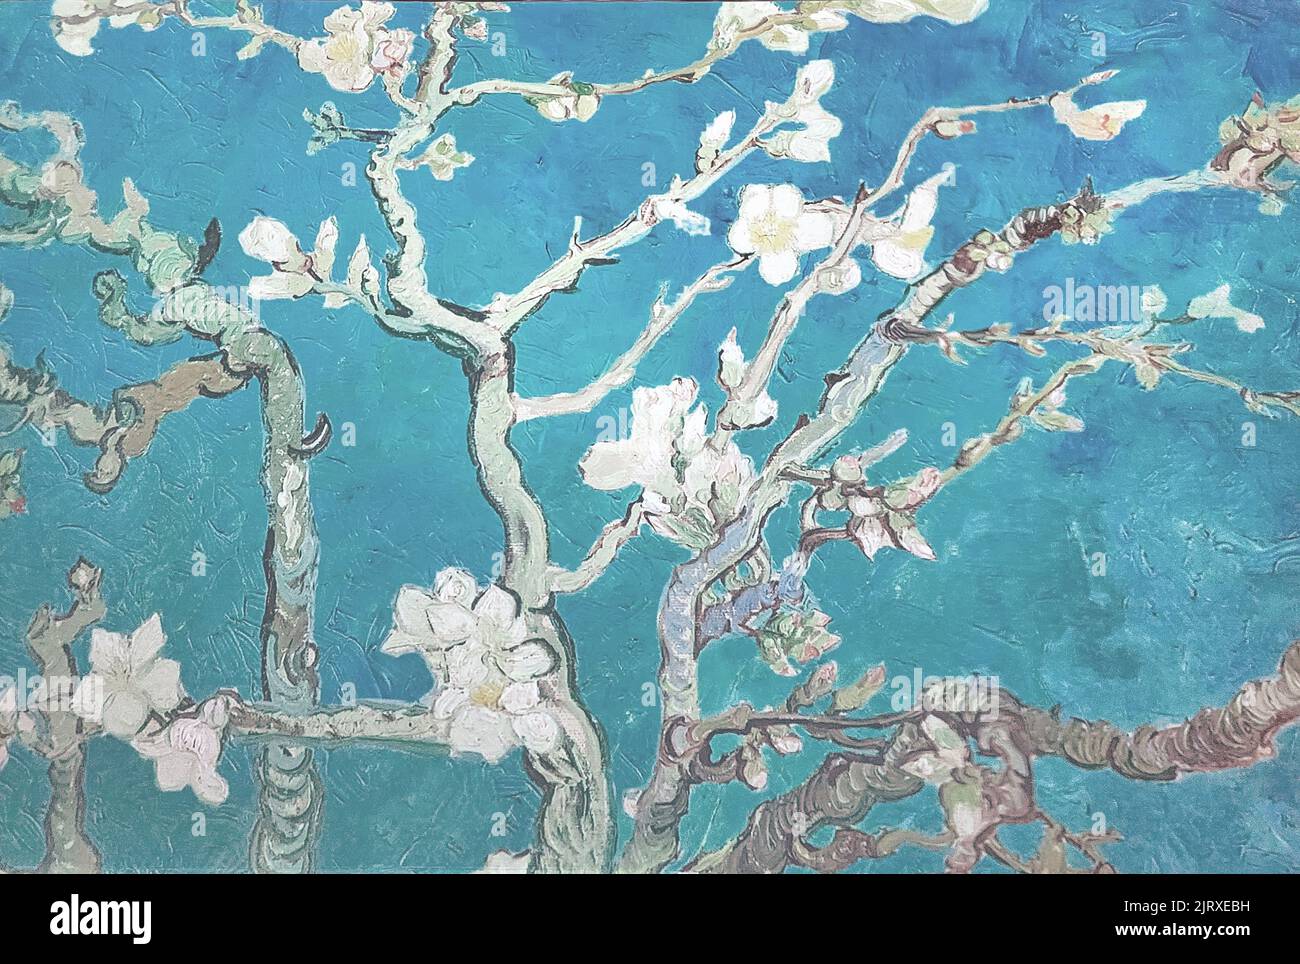 Almond blossom pattern on turquoise background Stock Photo